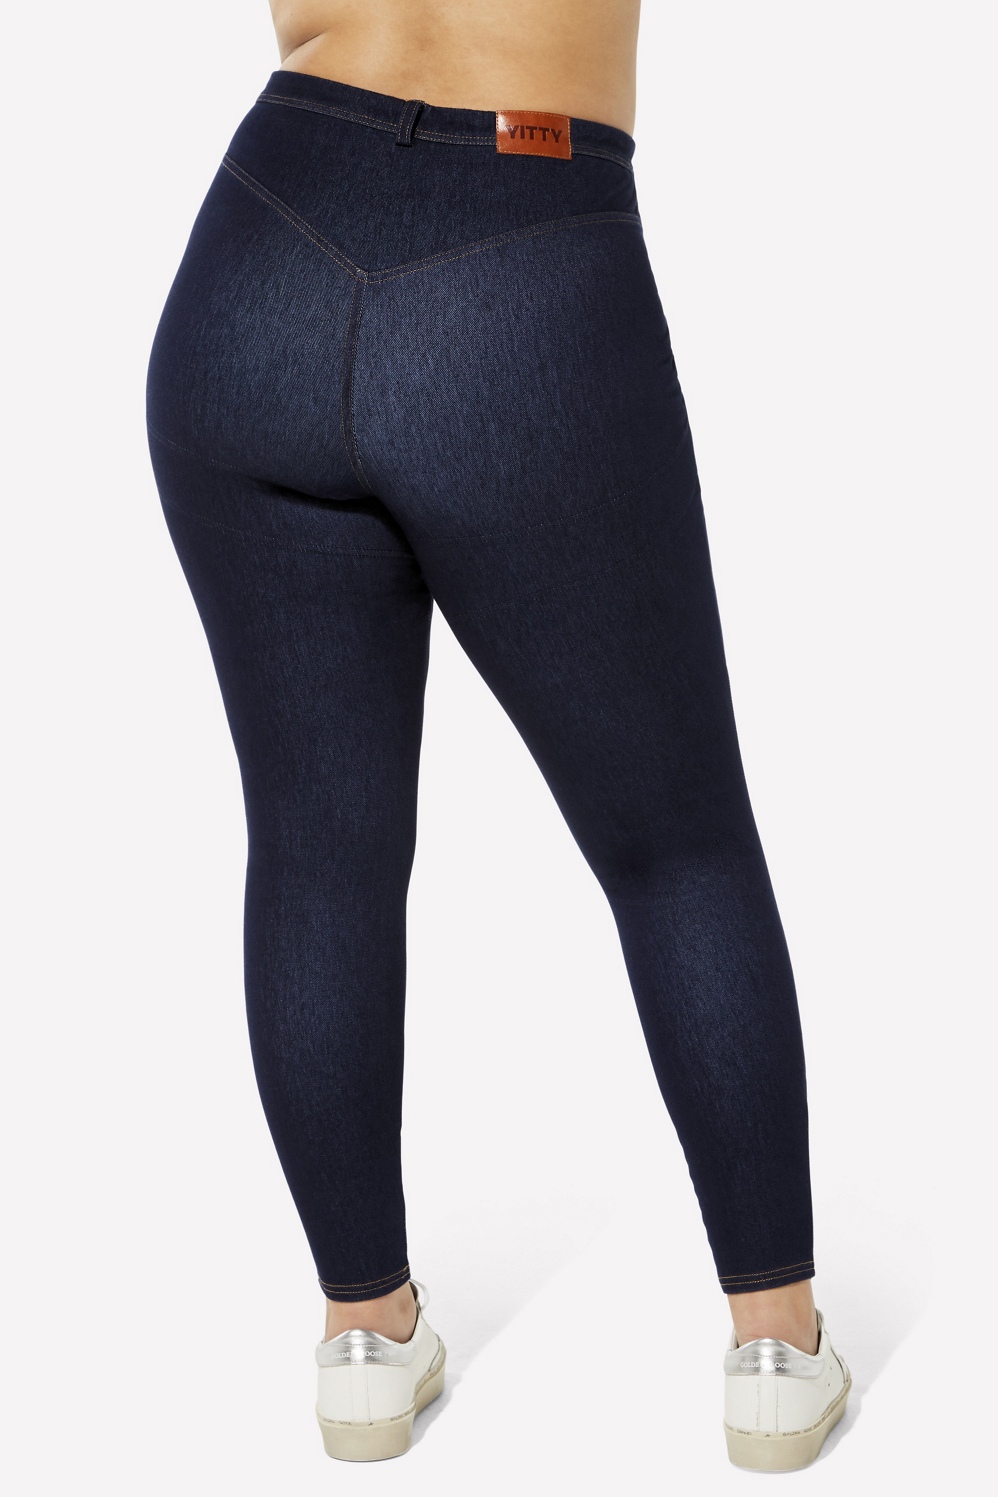 Jean Yitty Smoothing Stretch Is Denim - Served